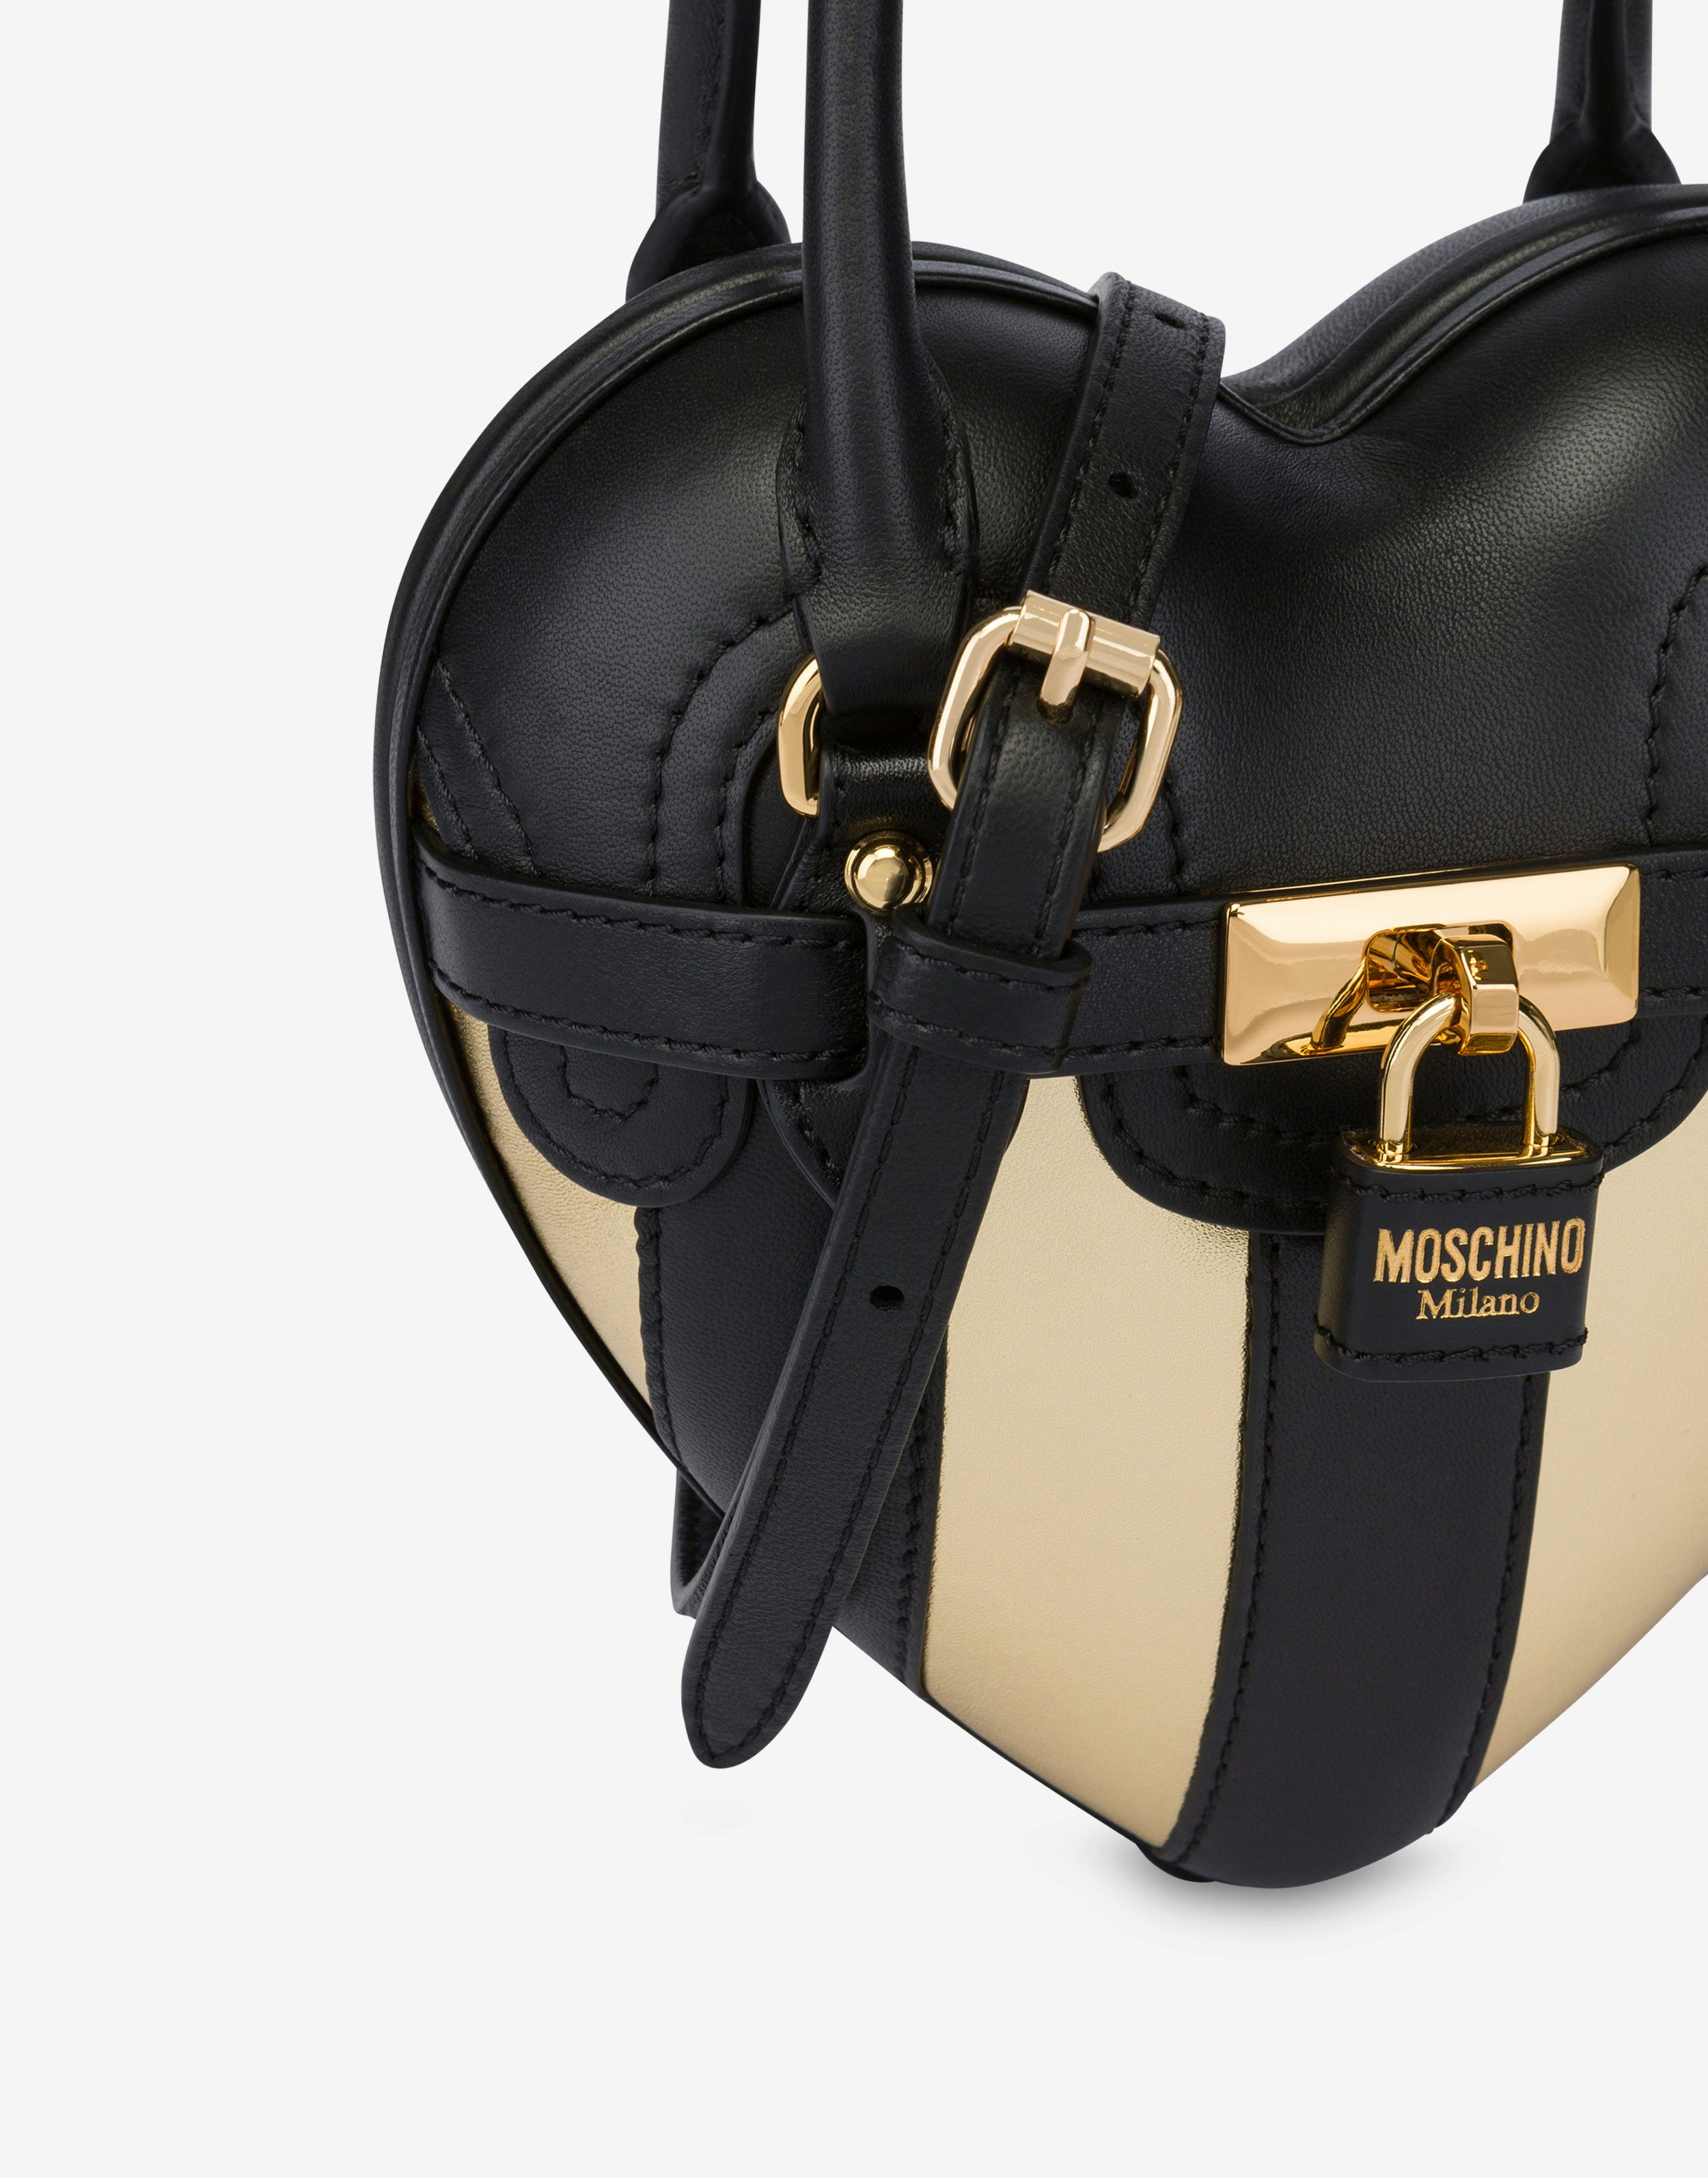 Moschino Heartbeat bag Stripes Patchwork 2